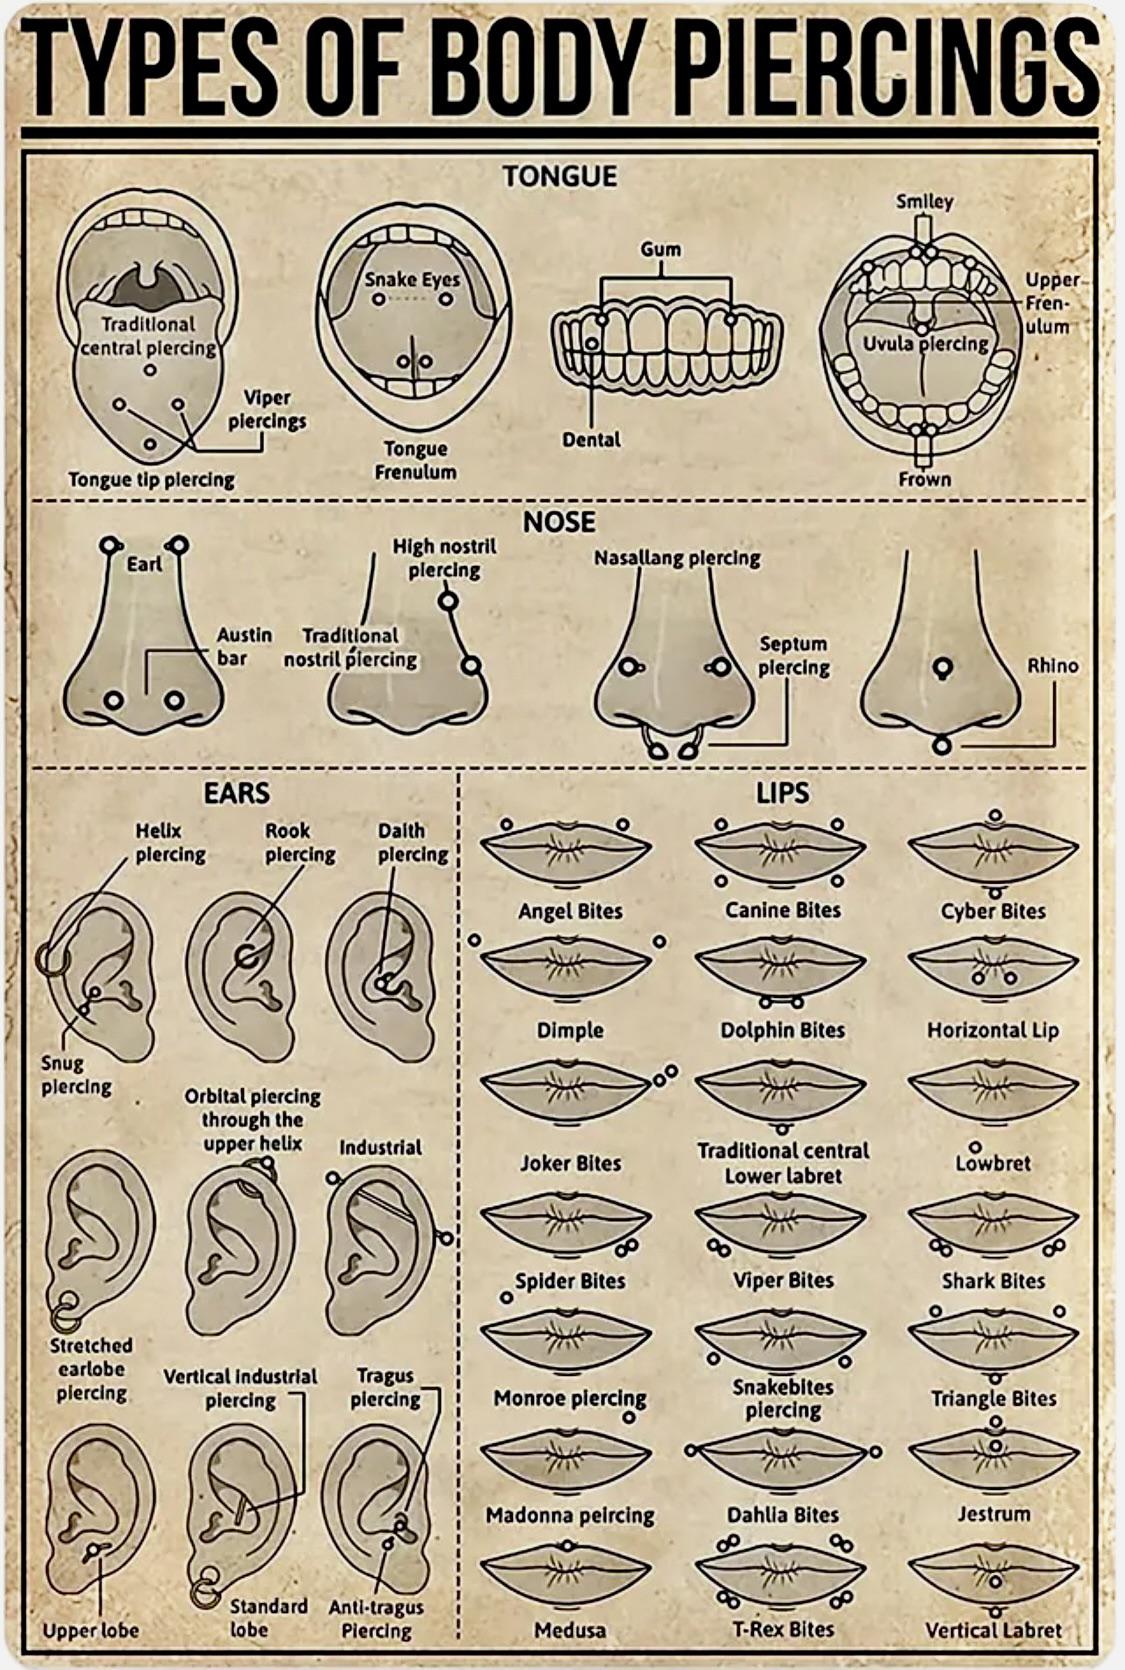 A Guide to the Different Types of Body Piercings